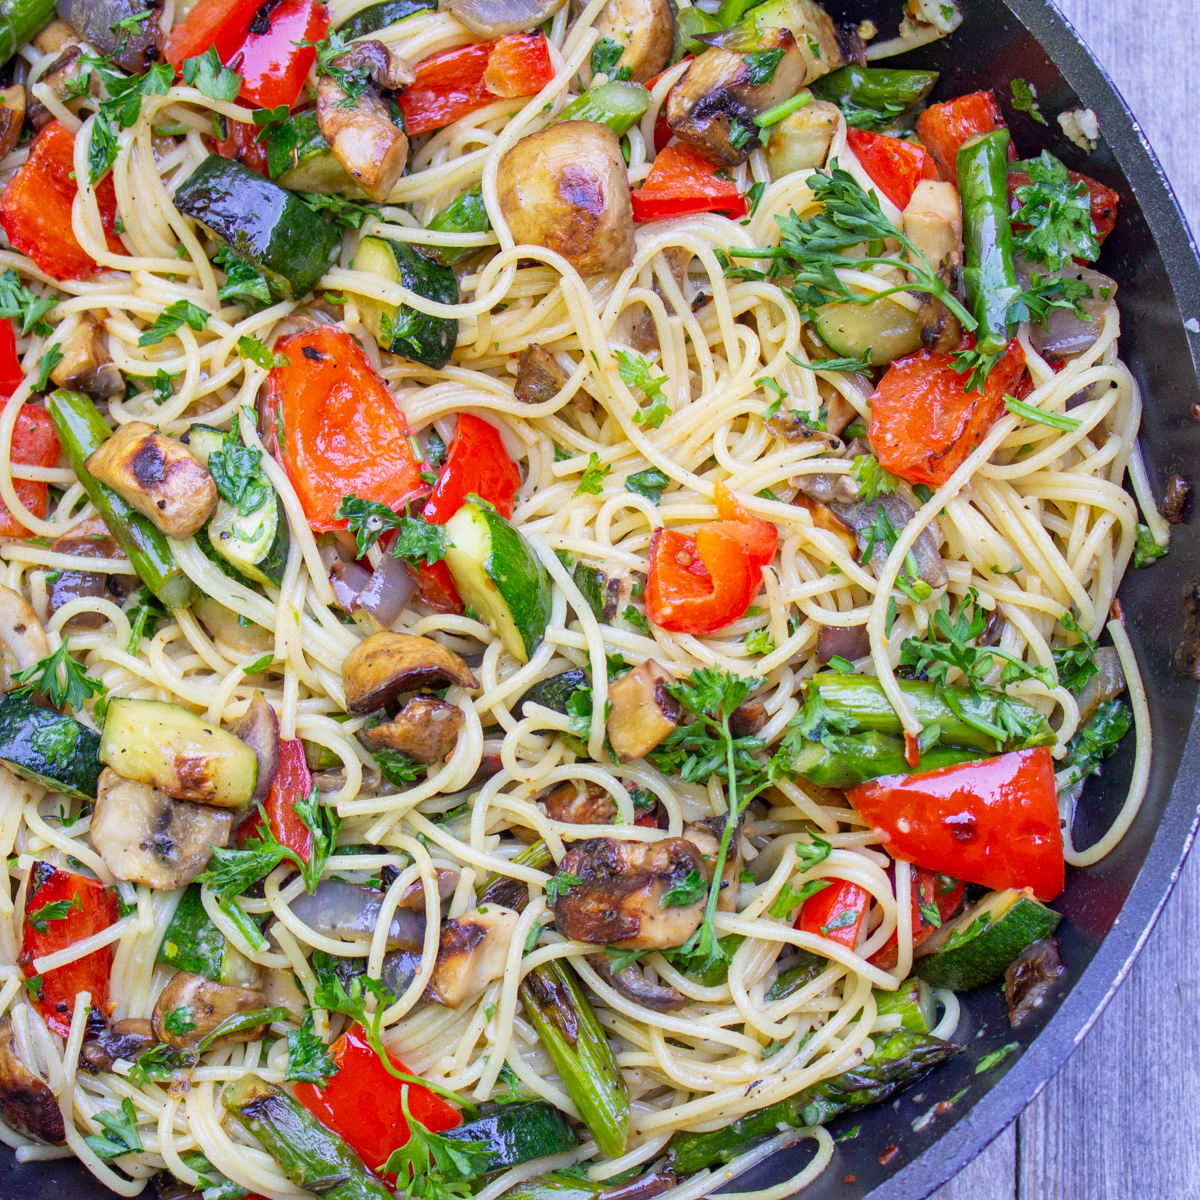 spaghetti with grilled veggies in wine sauce in skillet.